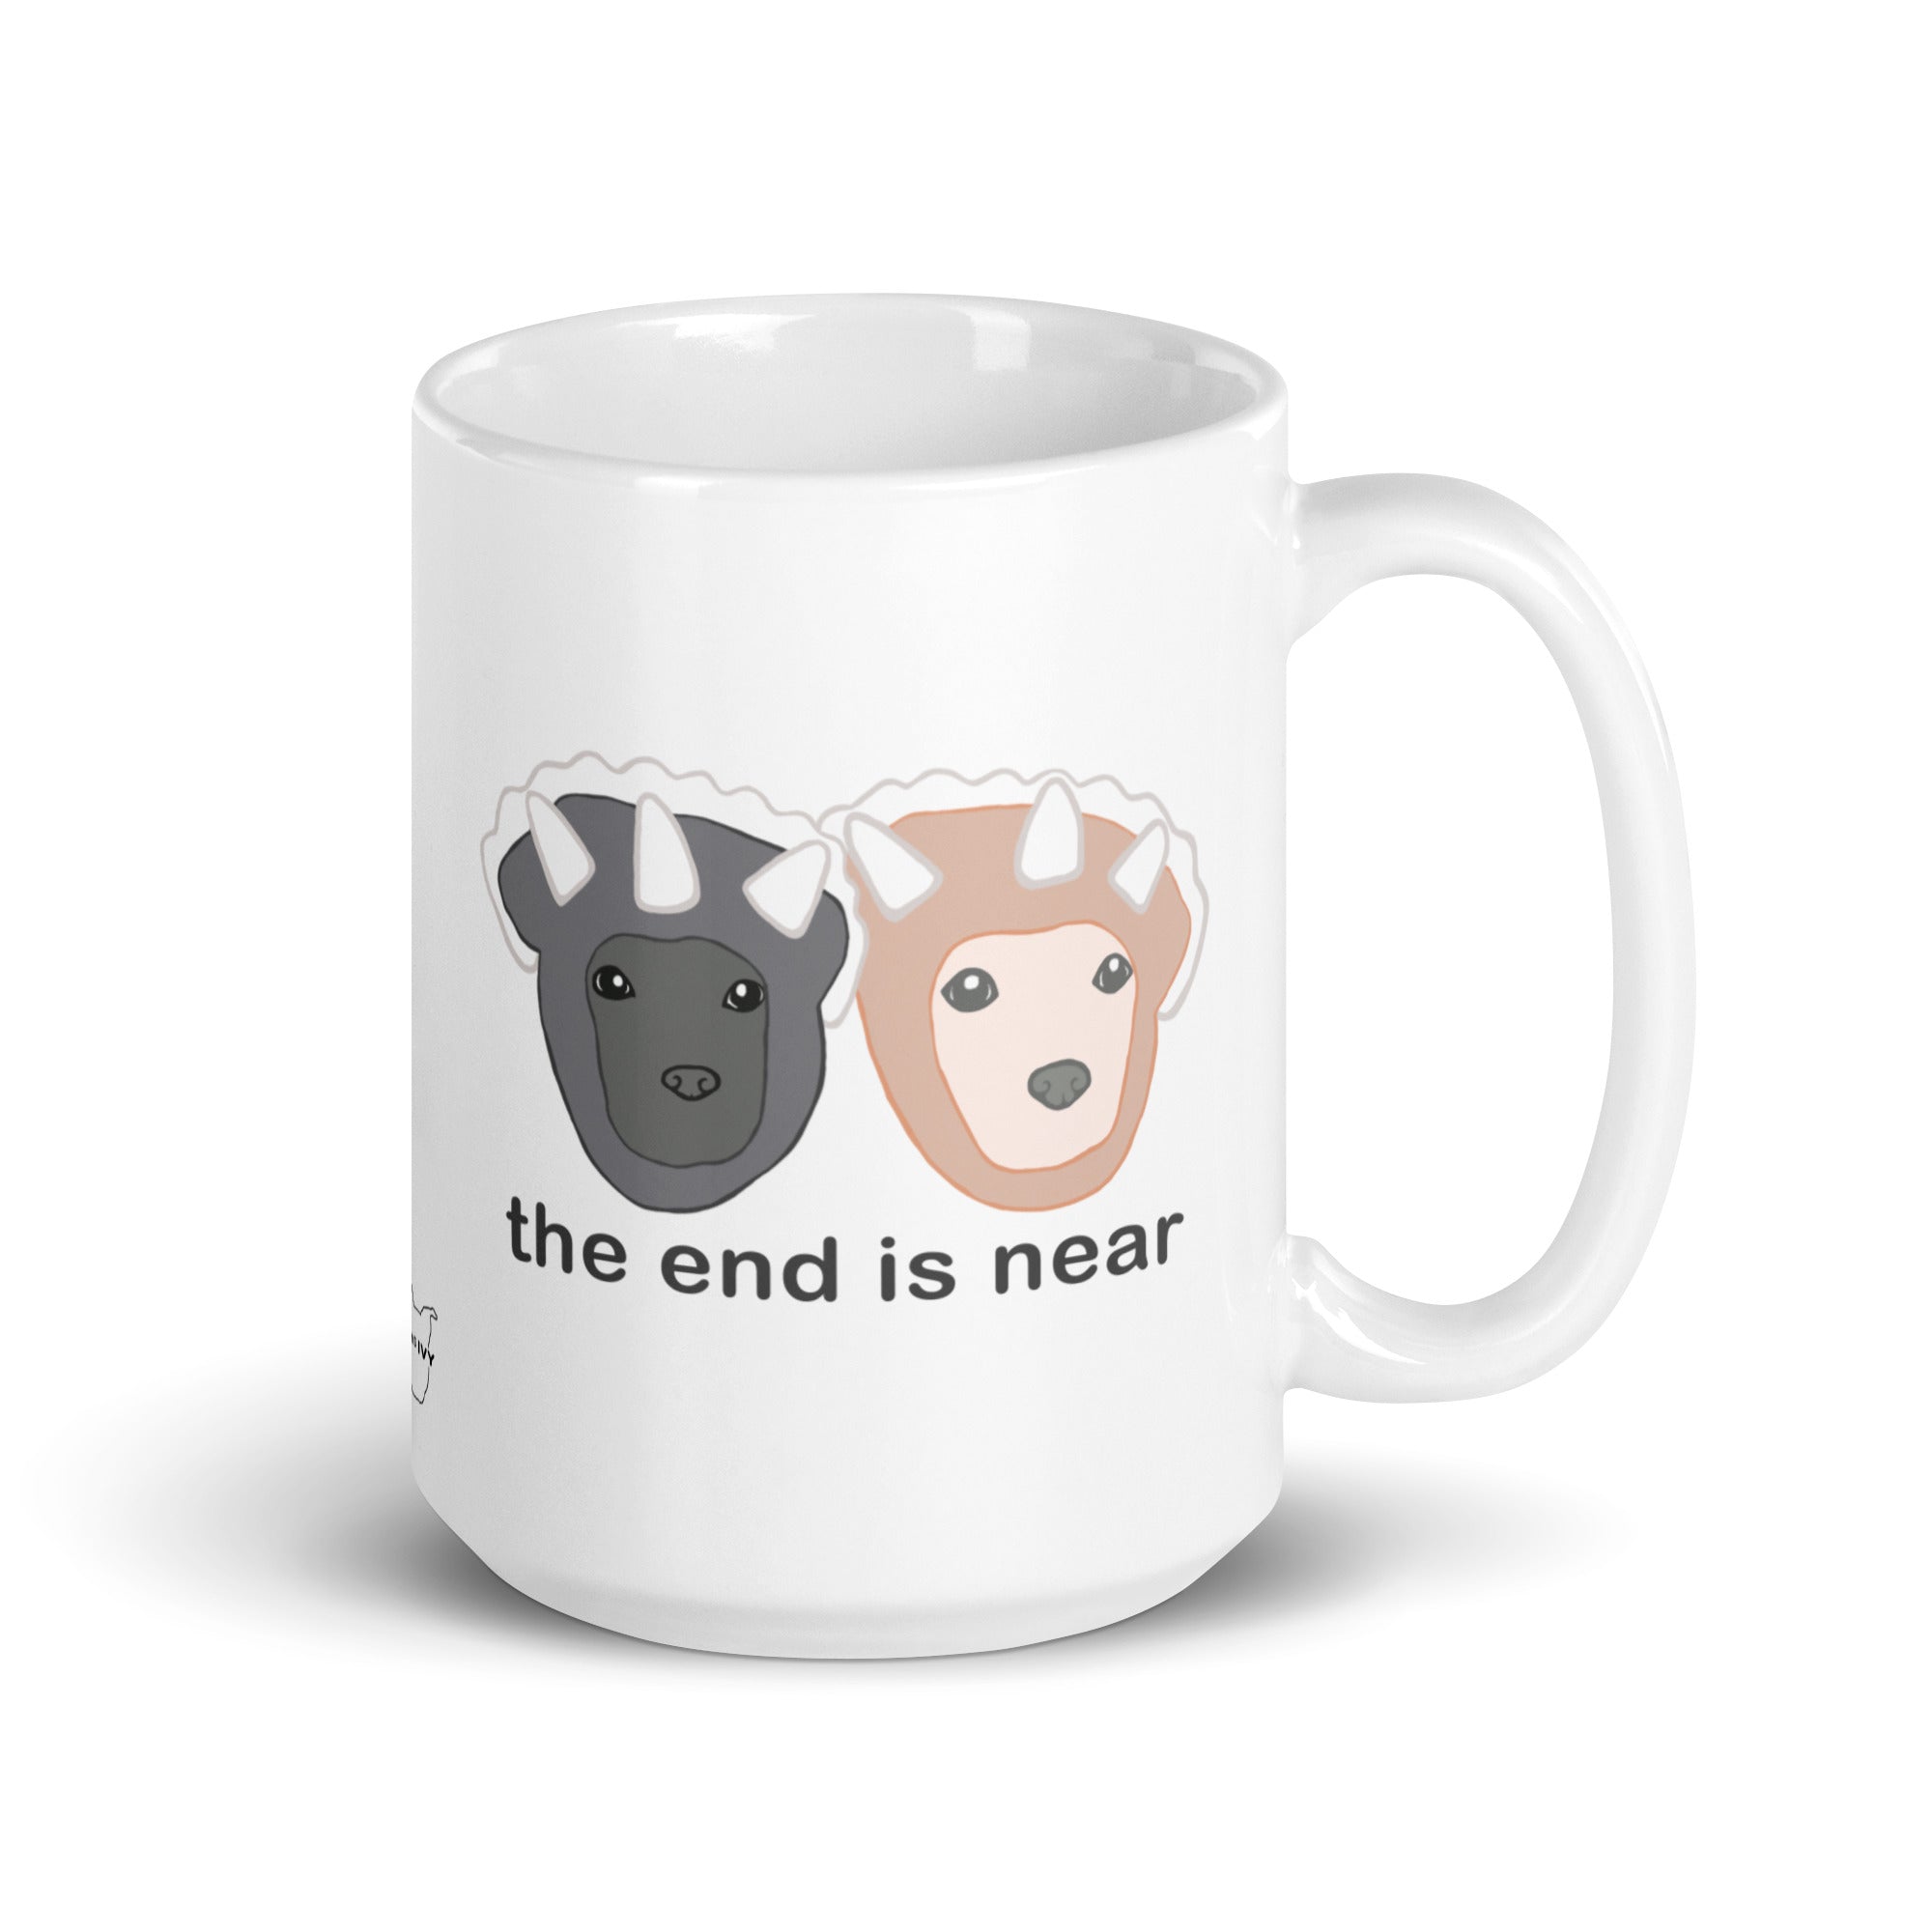 "The End is Near" Triceratops White glossy mug